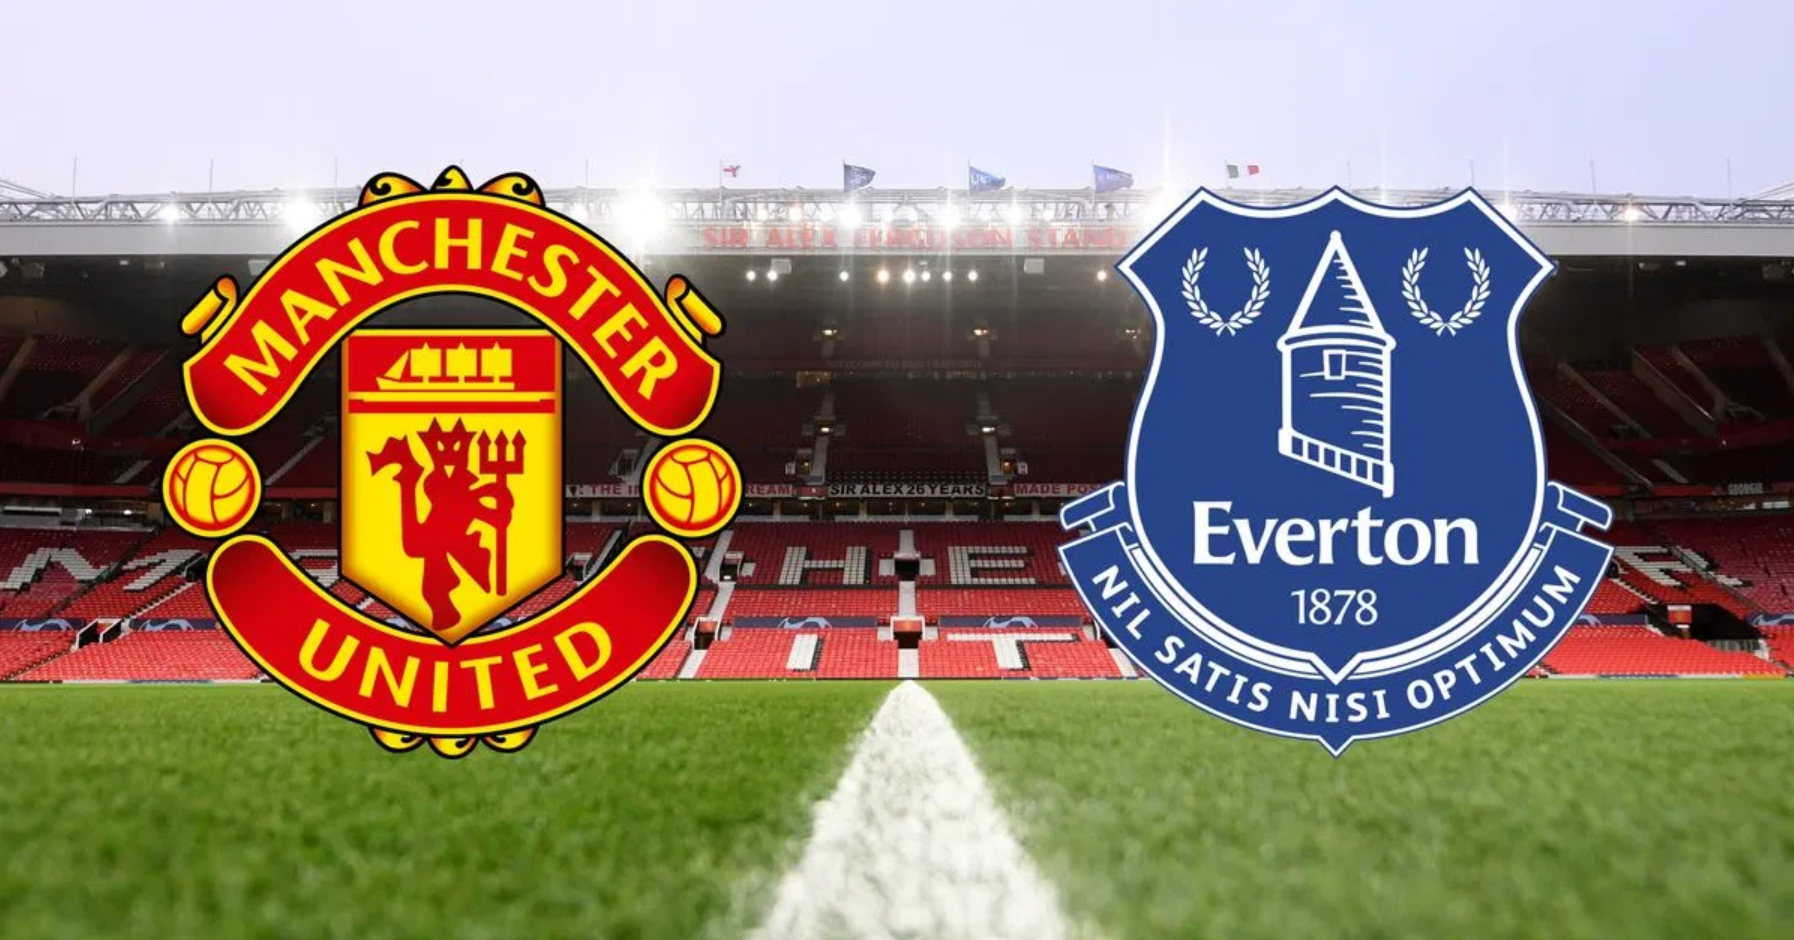 Man Utd Vs Everton 5 Talking Points Before Kick Off Don T Play Play Just Score Can Already